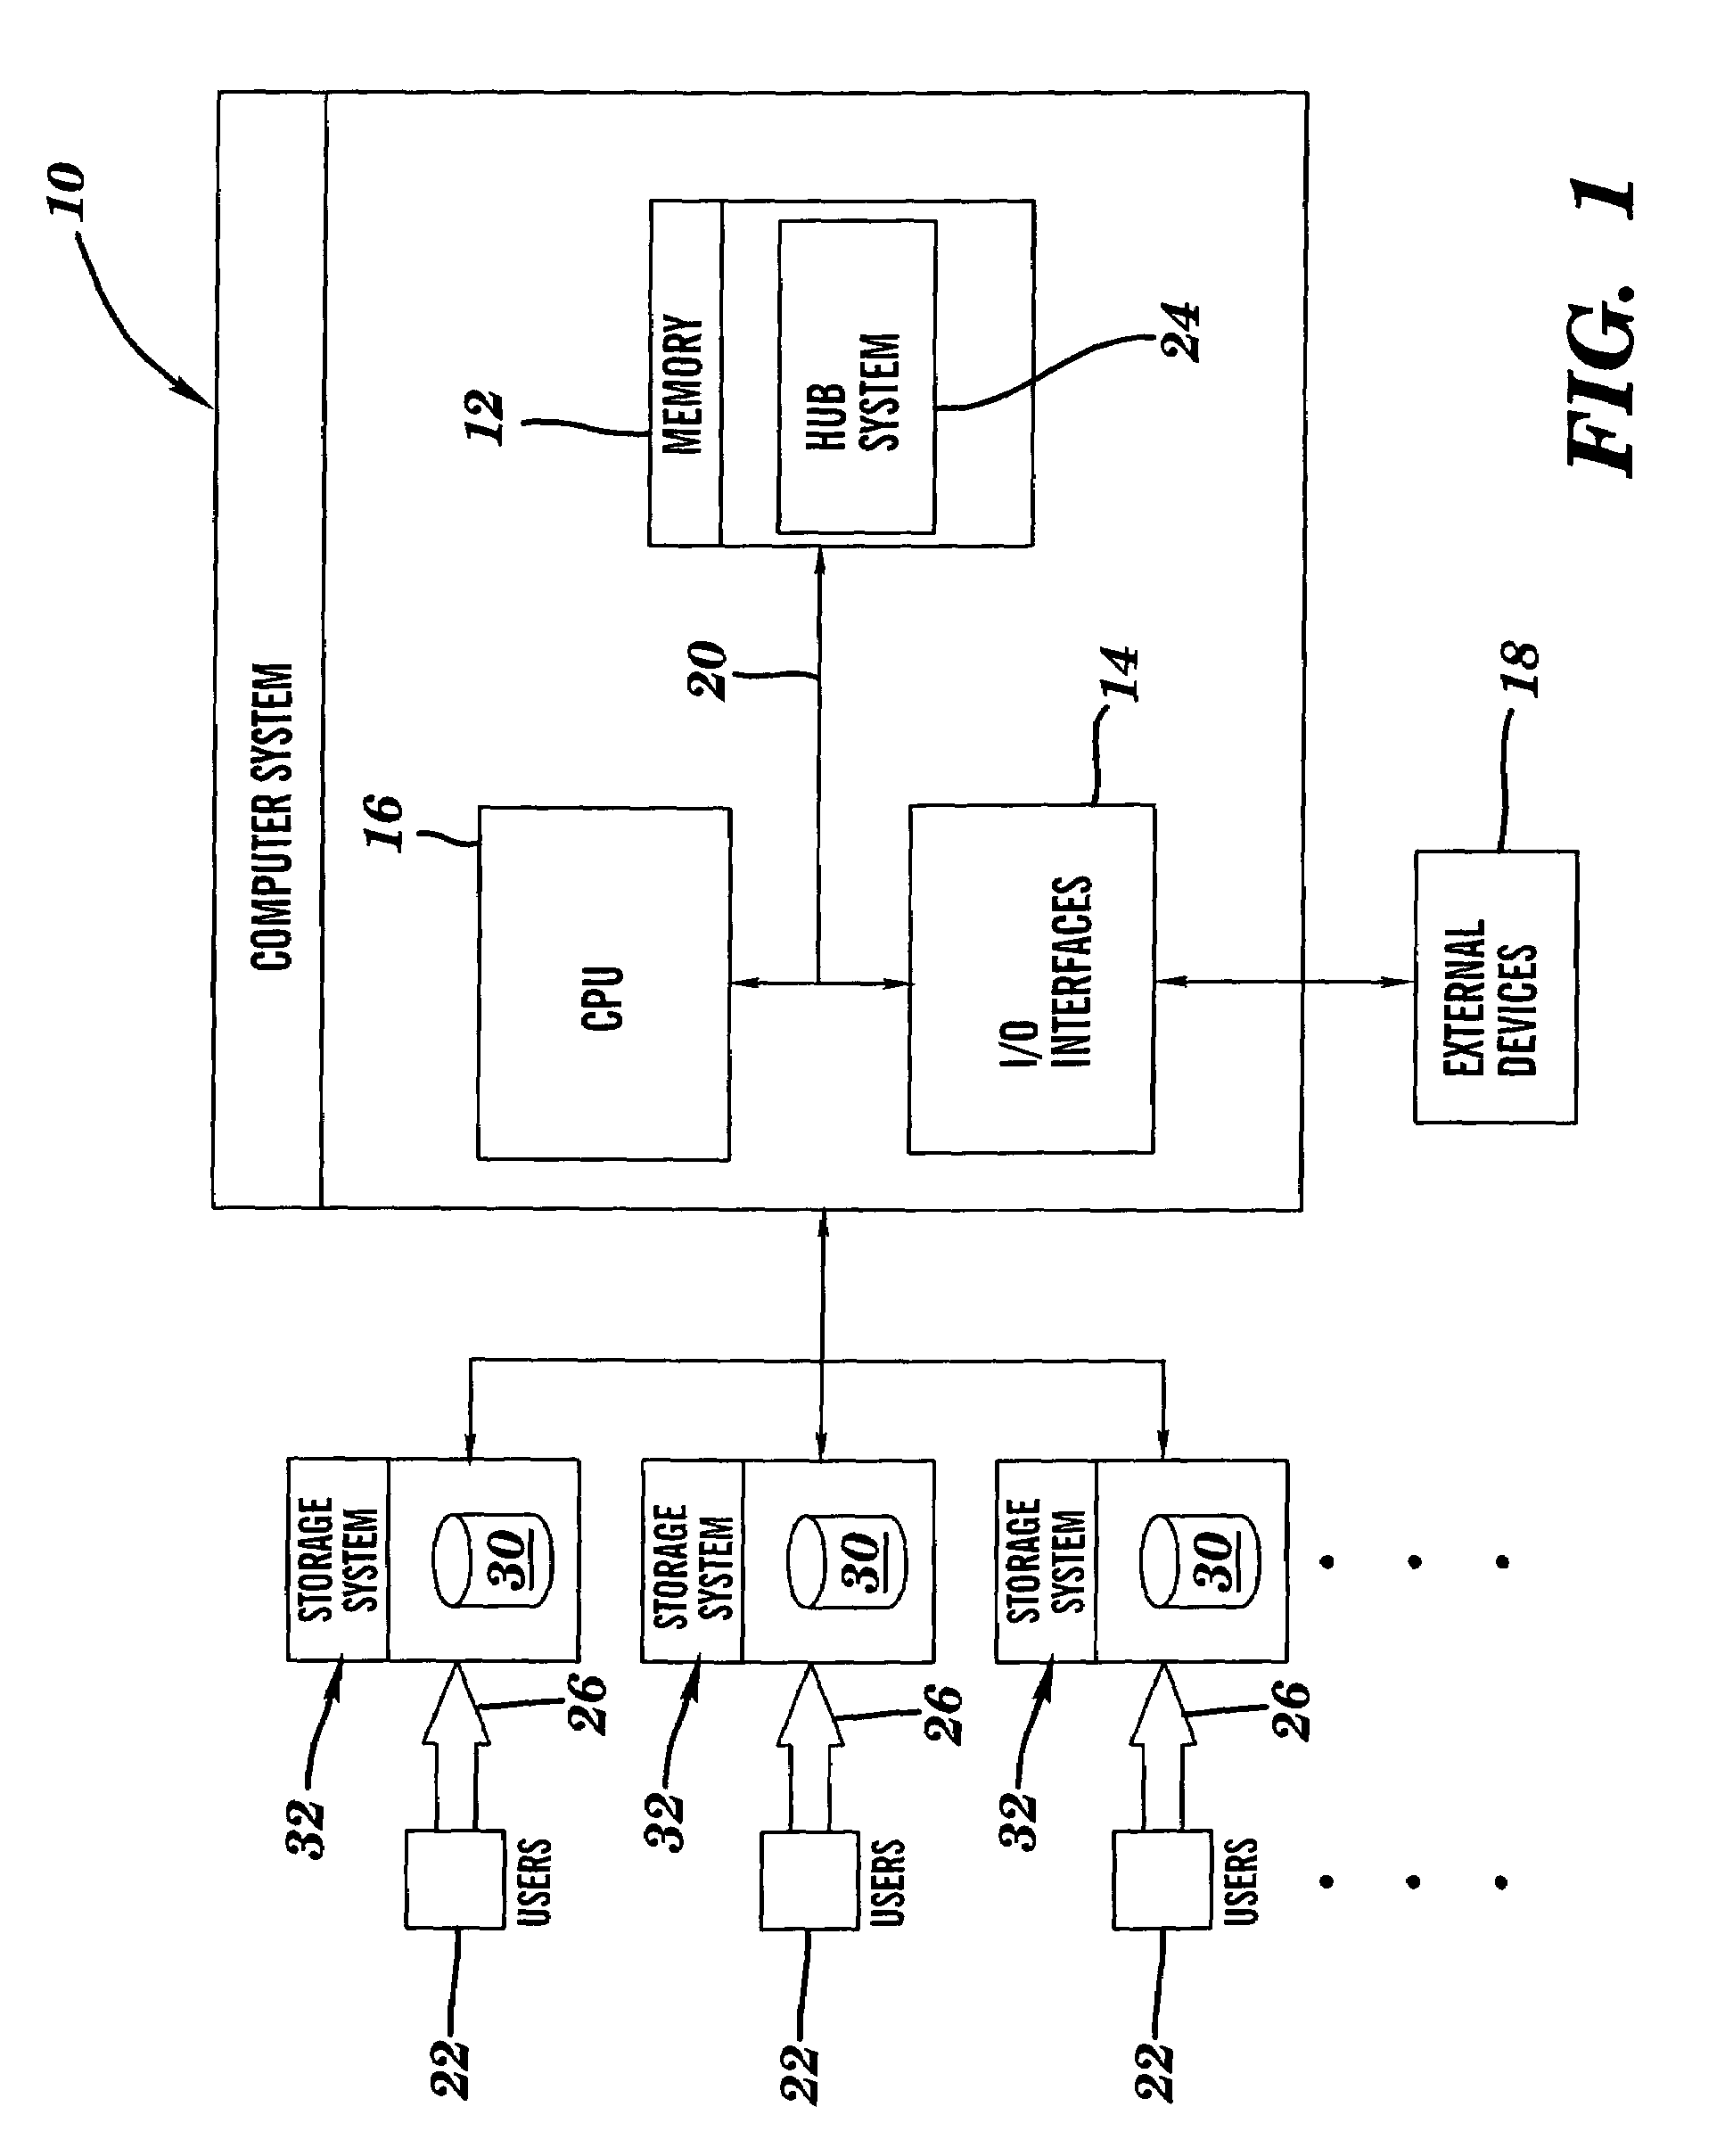 System and method for synchronizing related data elements in disparate storage systems